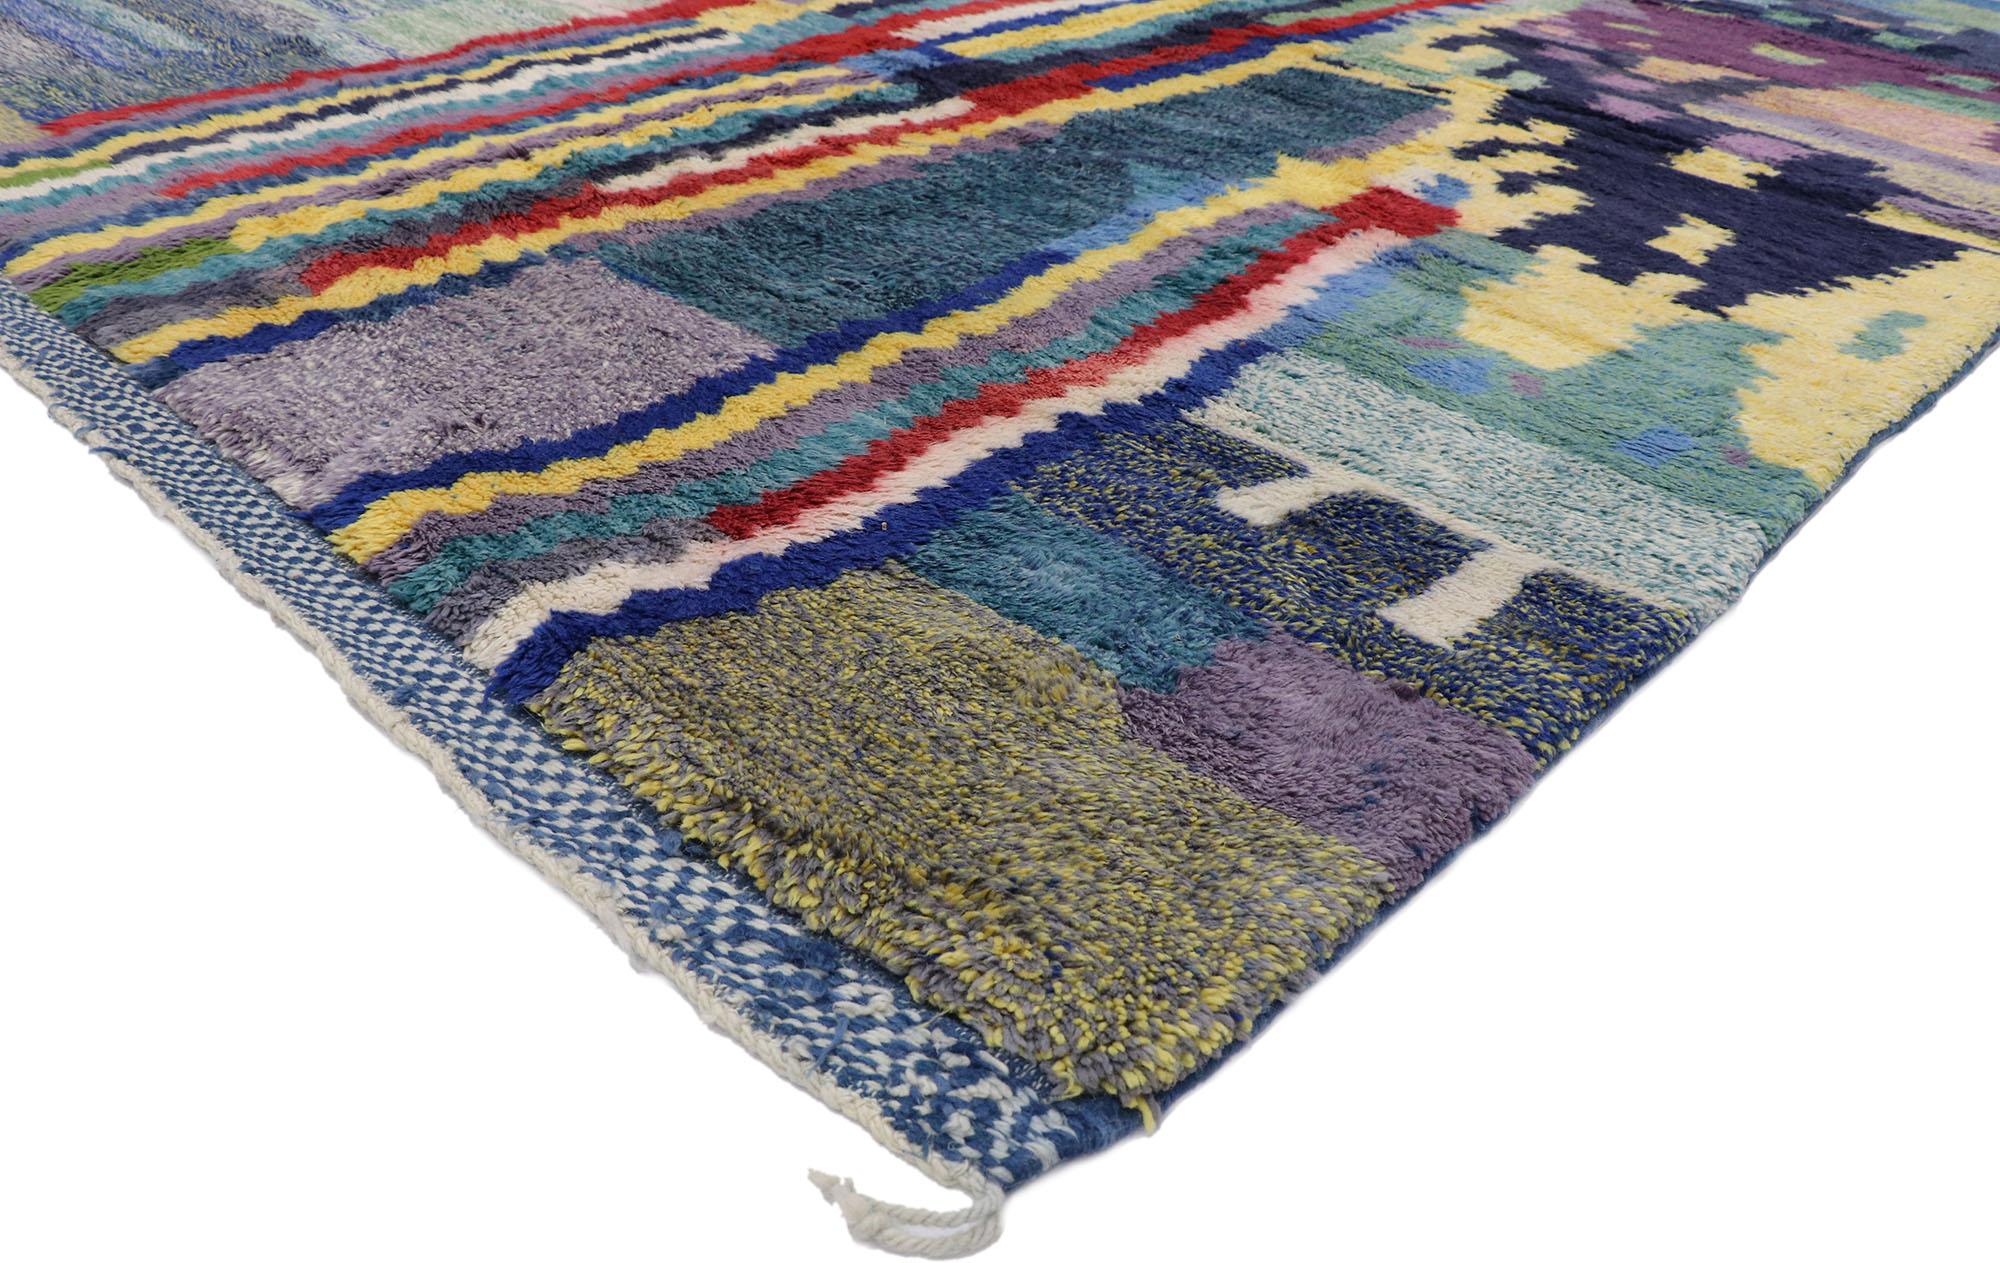 ​21139 Colorful Abstract Moroccan Rug, 08'11 x 11'06.
Emulating Abstract Expressionist style with nomadic charm, this hand knotted wool Berber Moroccan rug is a captivating vision of woven beauty. The visual complexity and intense color palette